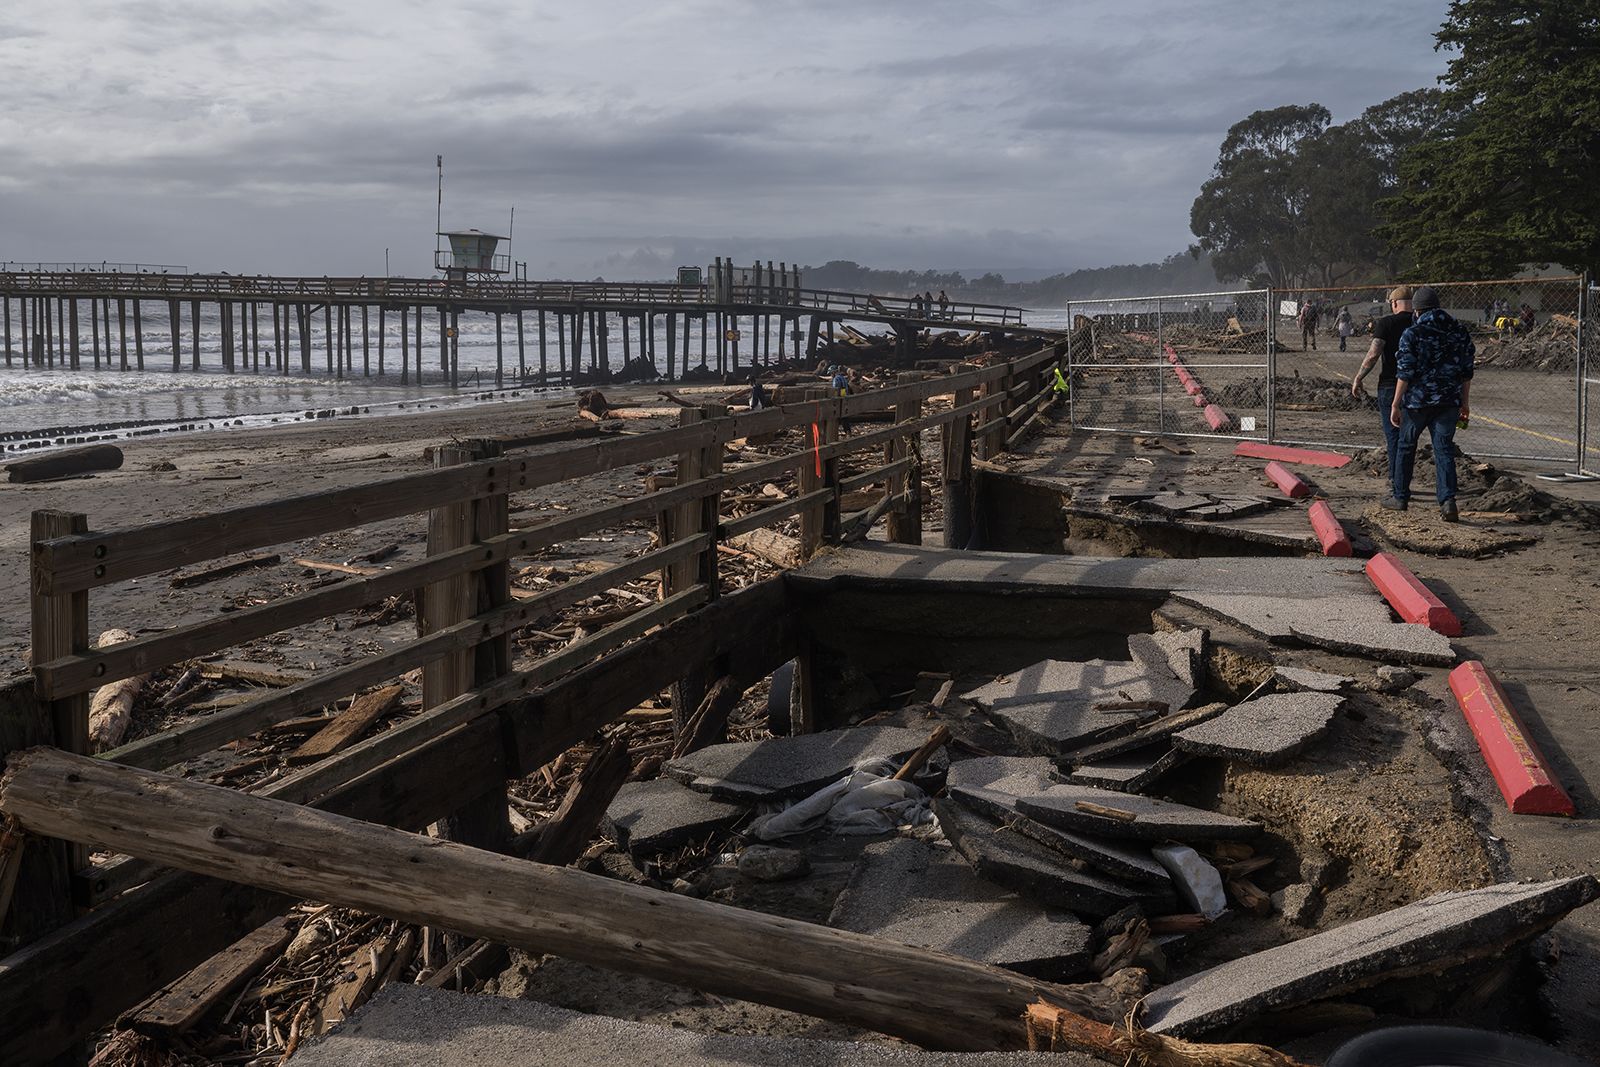 YEAR IN REVIEW: Summerland's iconic pier was removed - Summerland